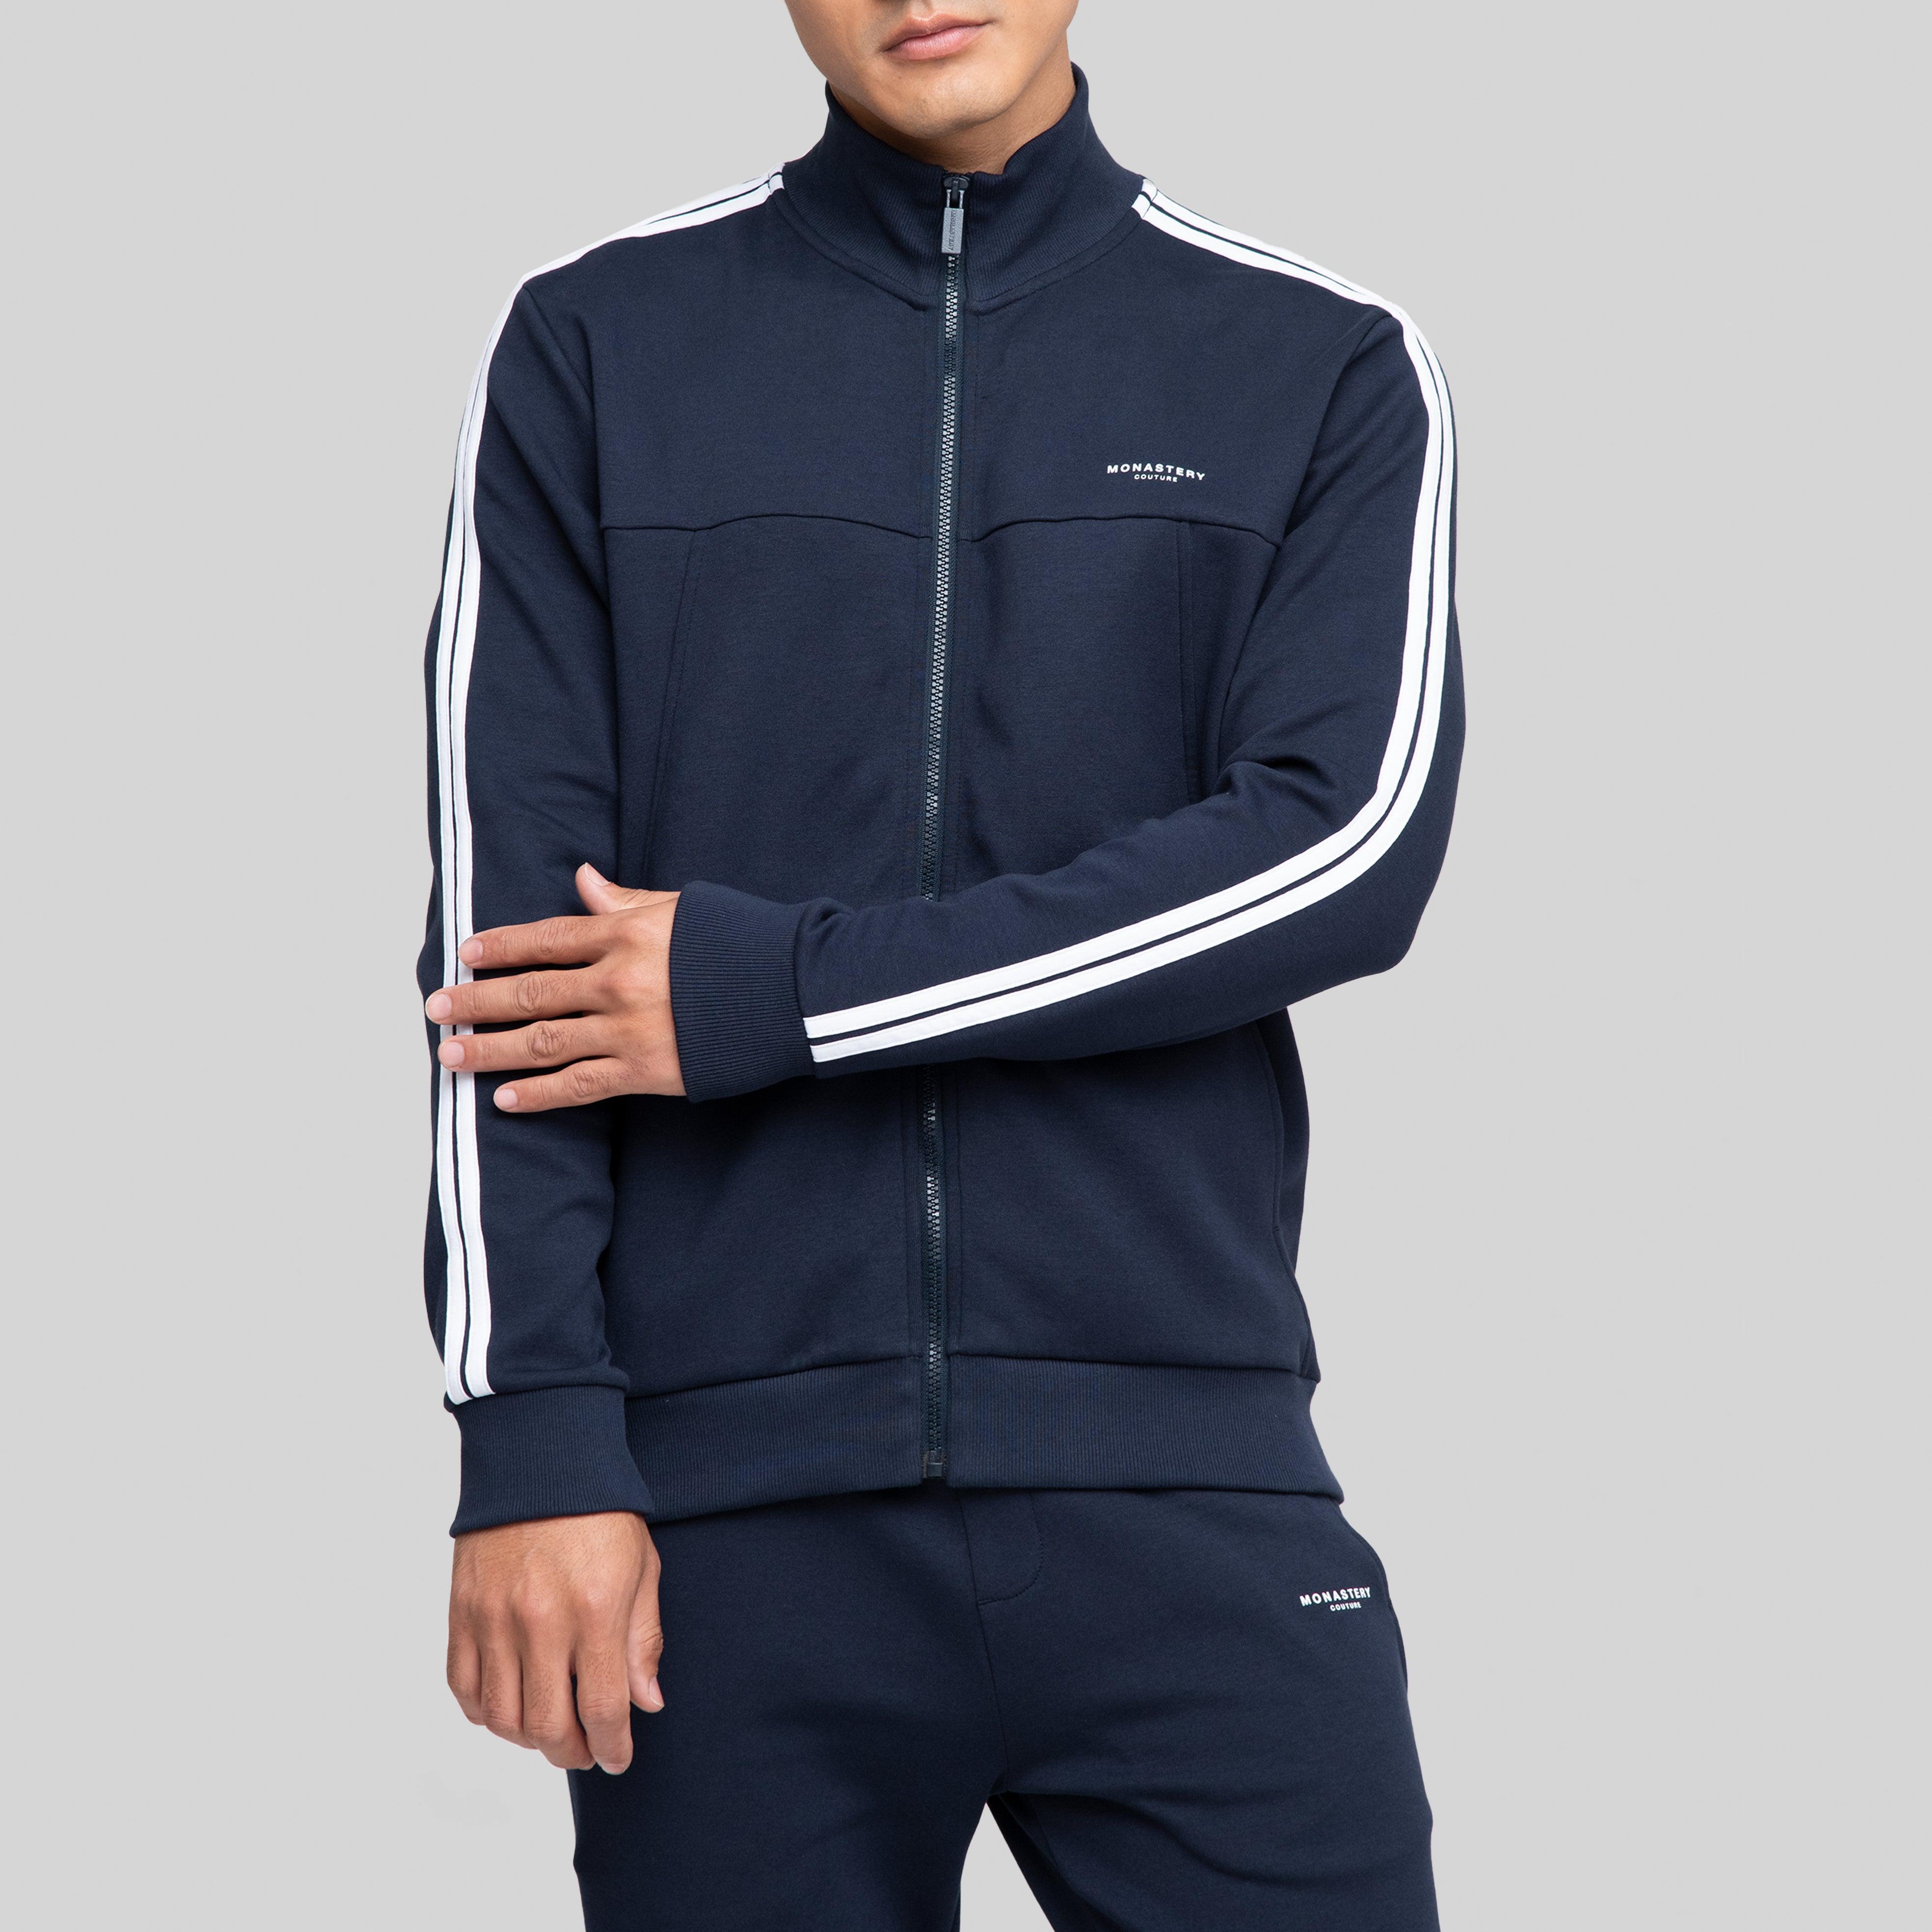 VENATICE NAVY BLUE TRACKSUITS | Monastery Couture